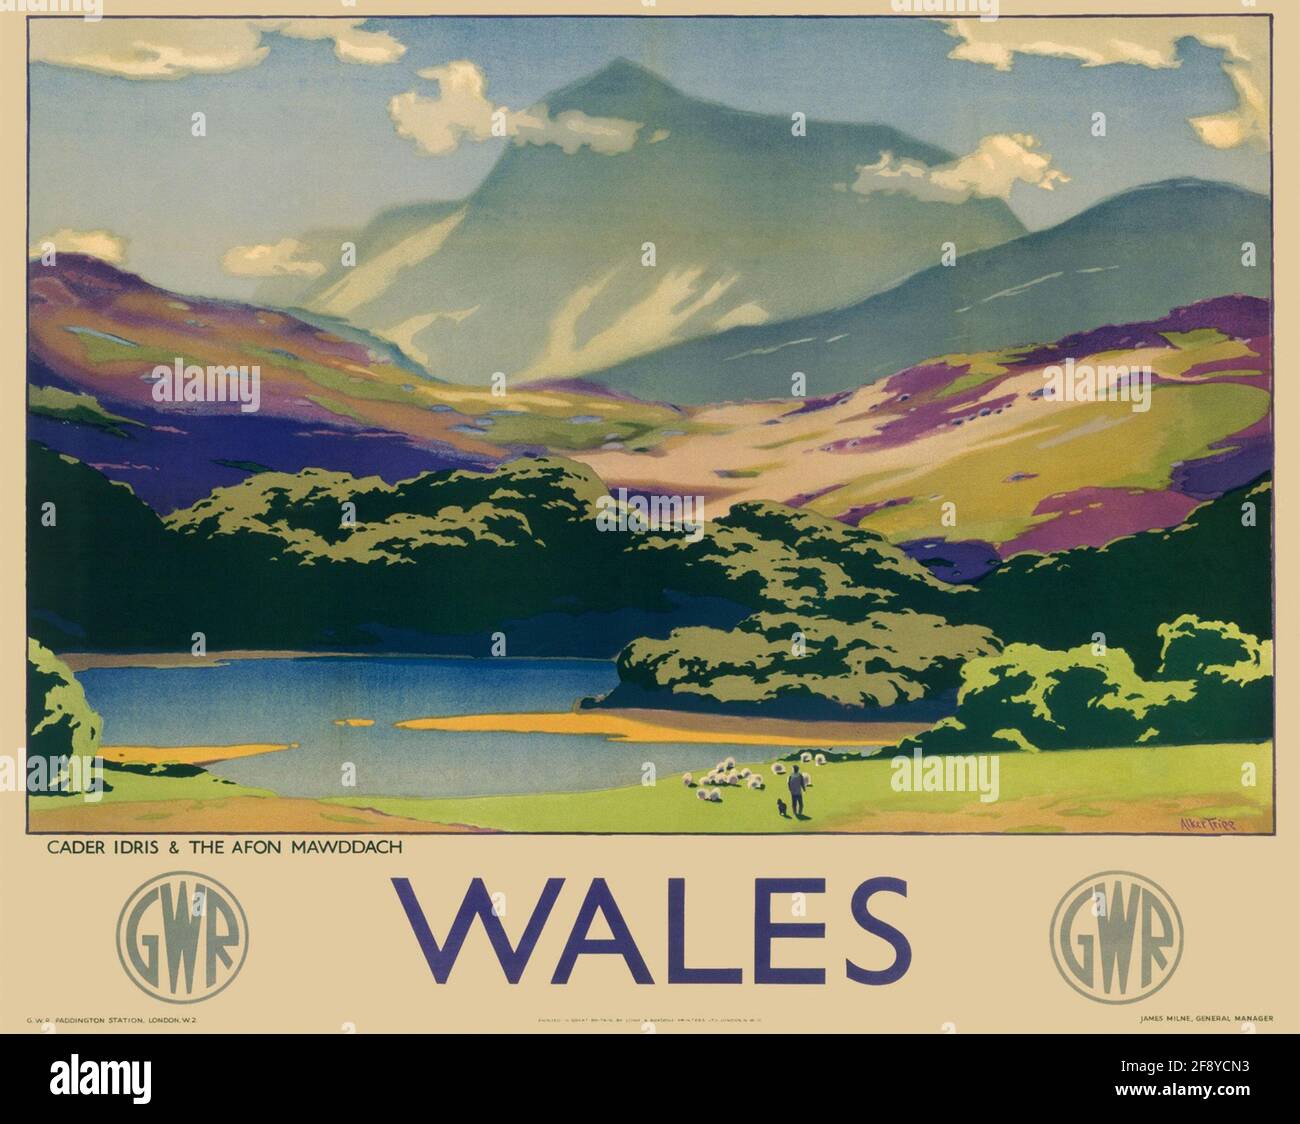 A vintage travel poster for Wales by the Great Western Railway Stock Photo